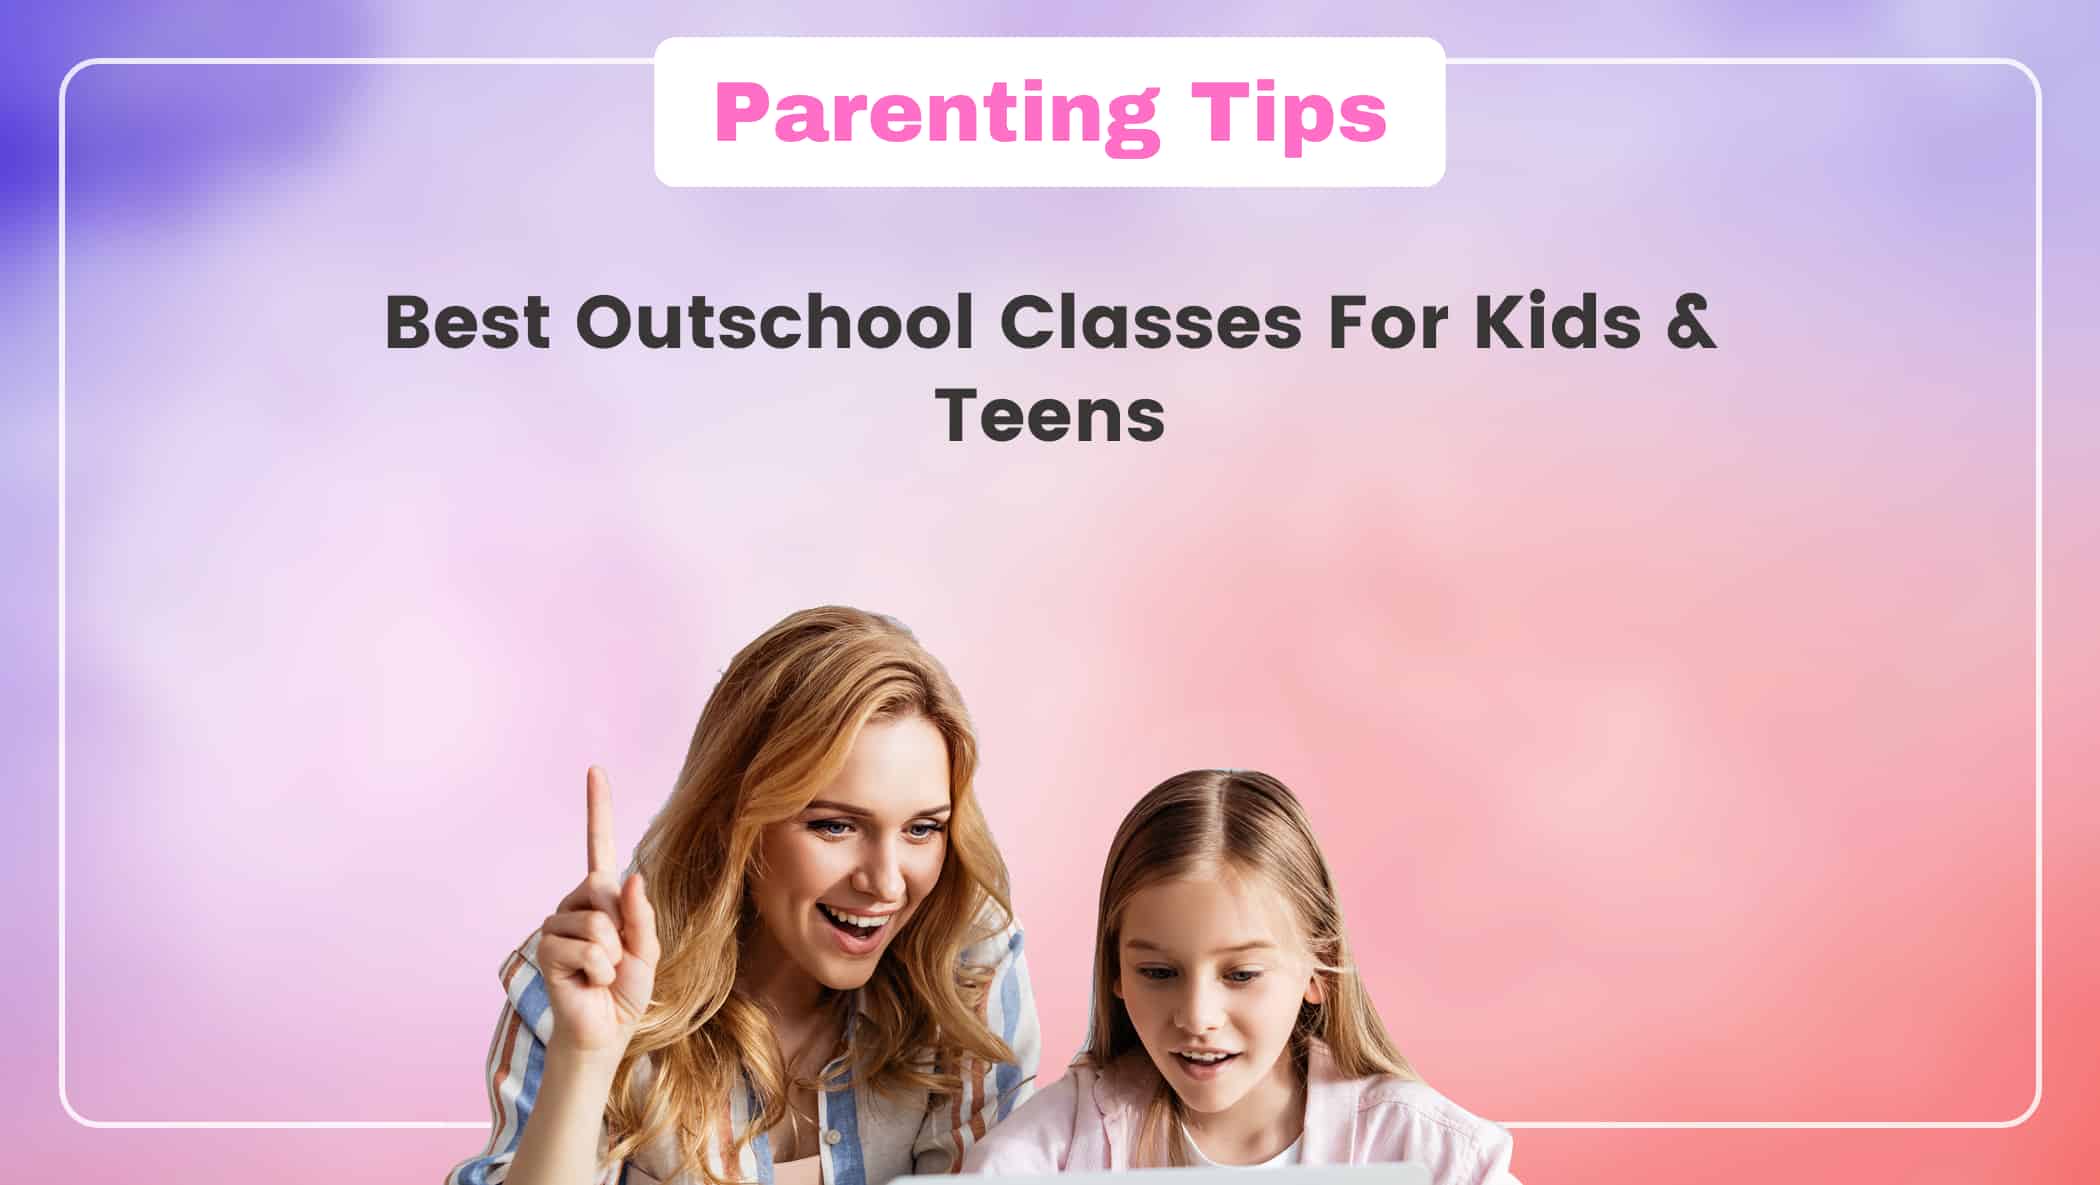 Best Outschool Classes For Kids & Teens Image